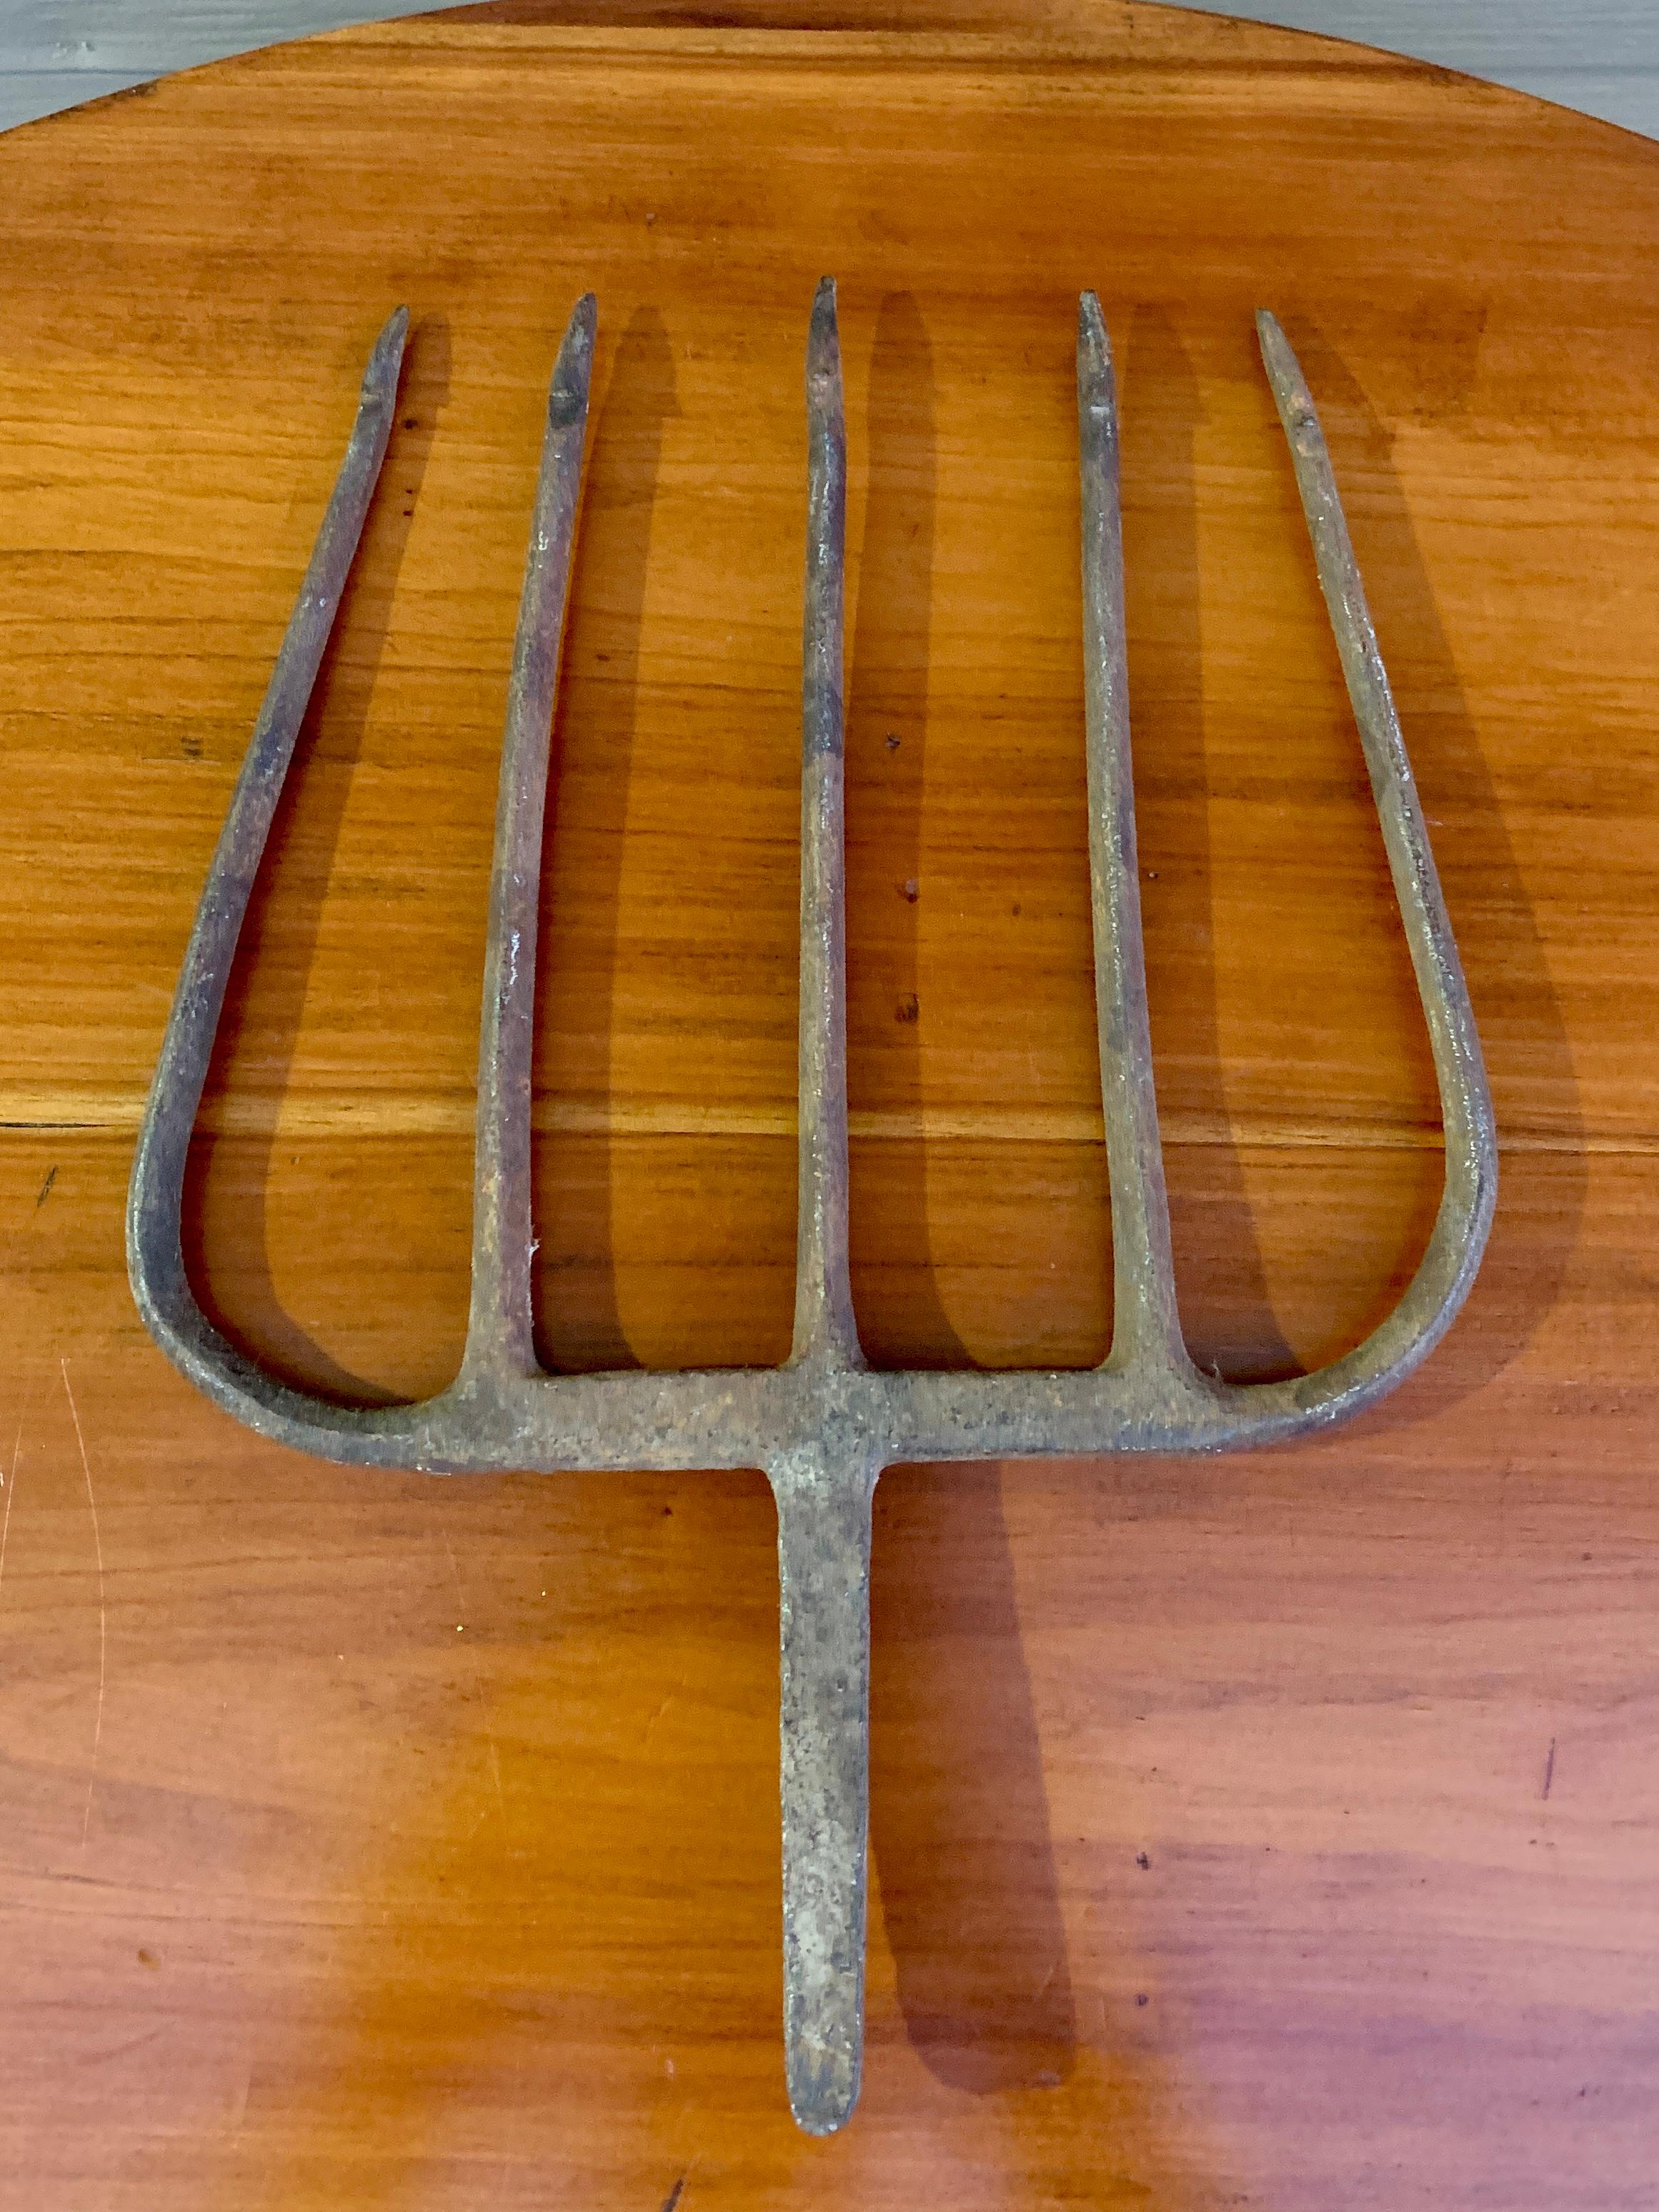 A beautiful hand forged wrought iron fishing harpoon with five prongs and arrow tips. This piece has a wonderful sculptural quality and patina. It would look perfect on a tabletop, mounted, or hanging on the wall.

USA, Late 19th Century

Measures: